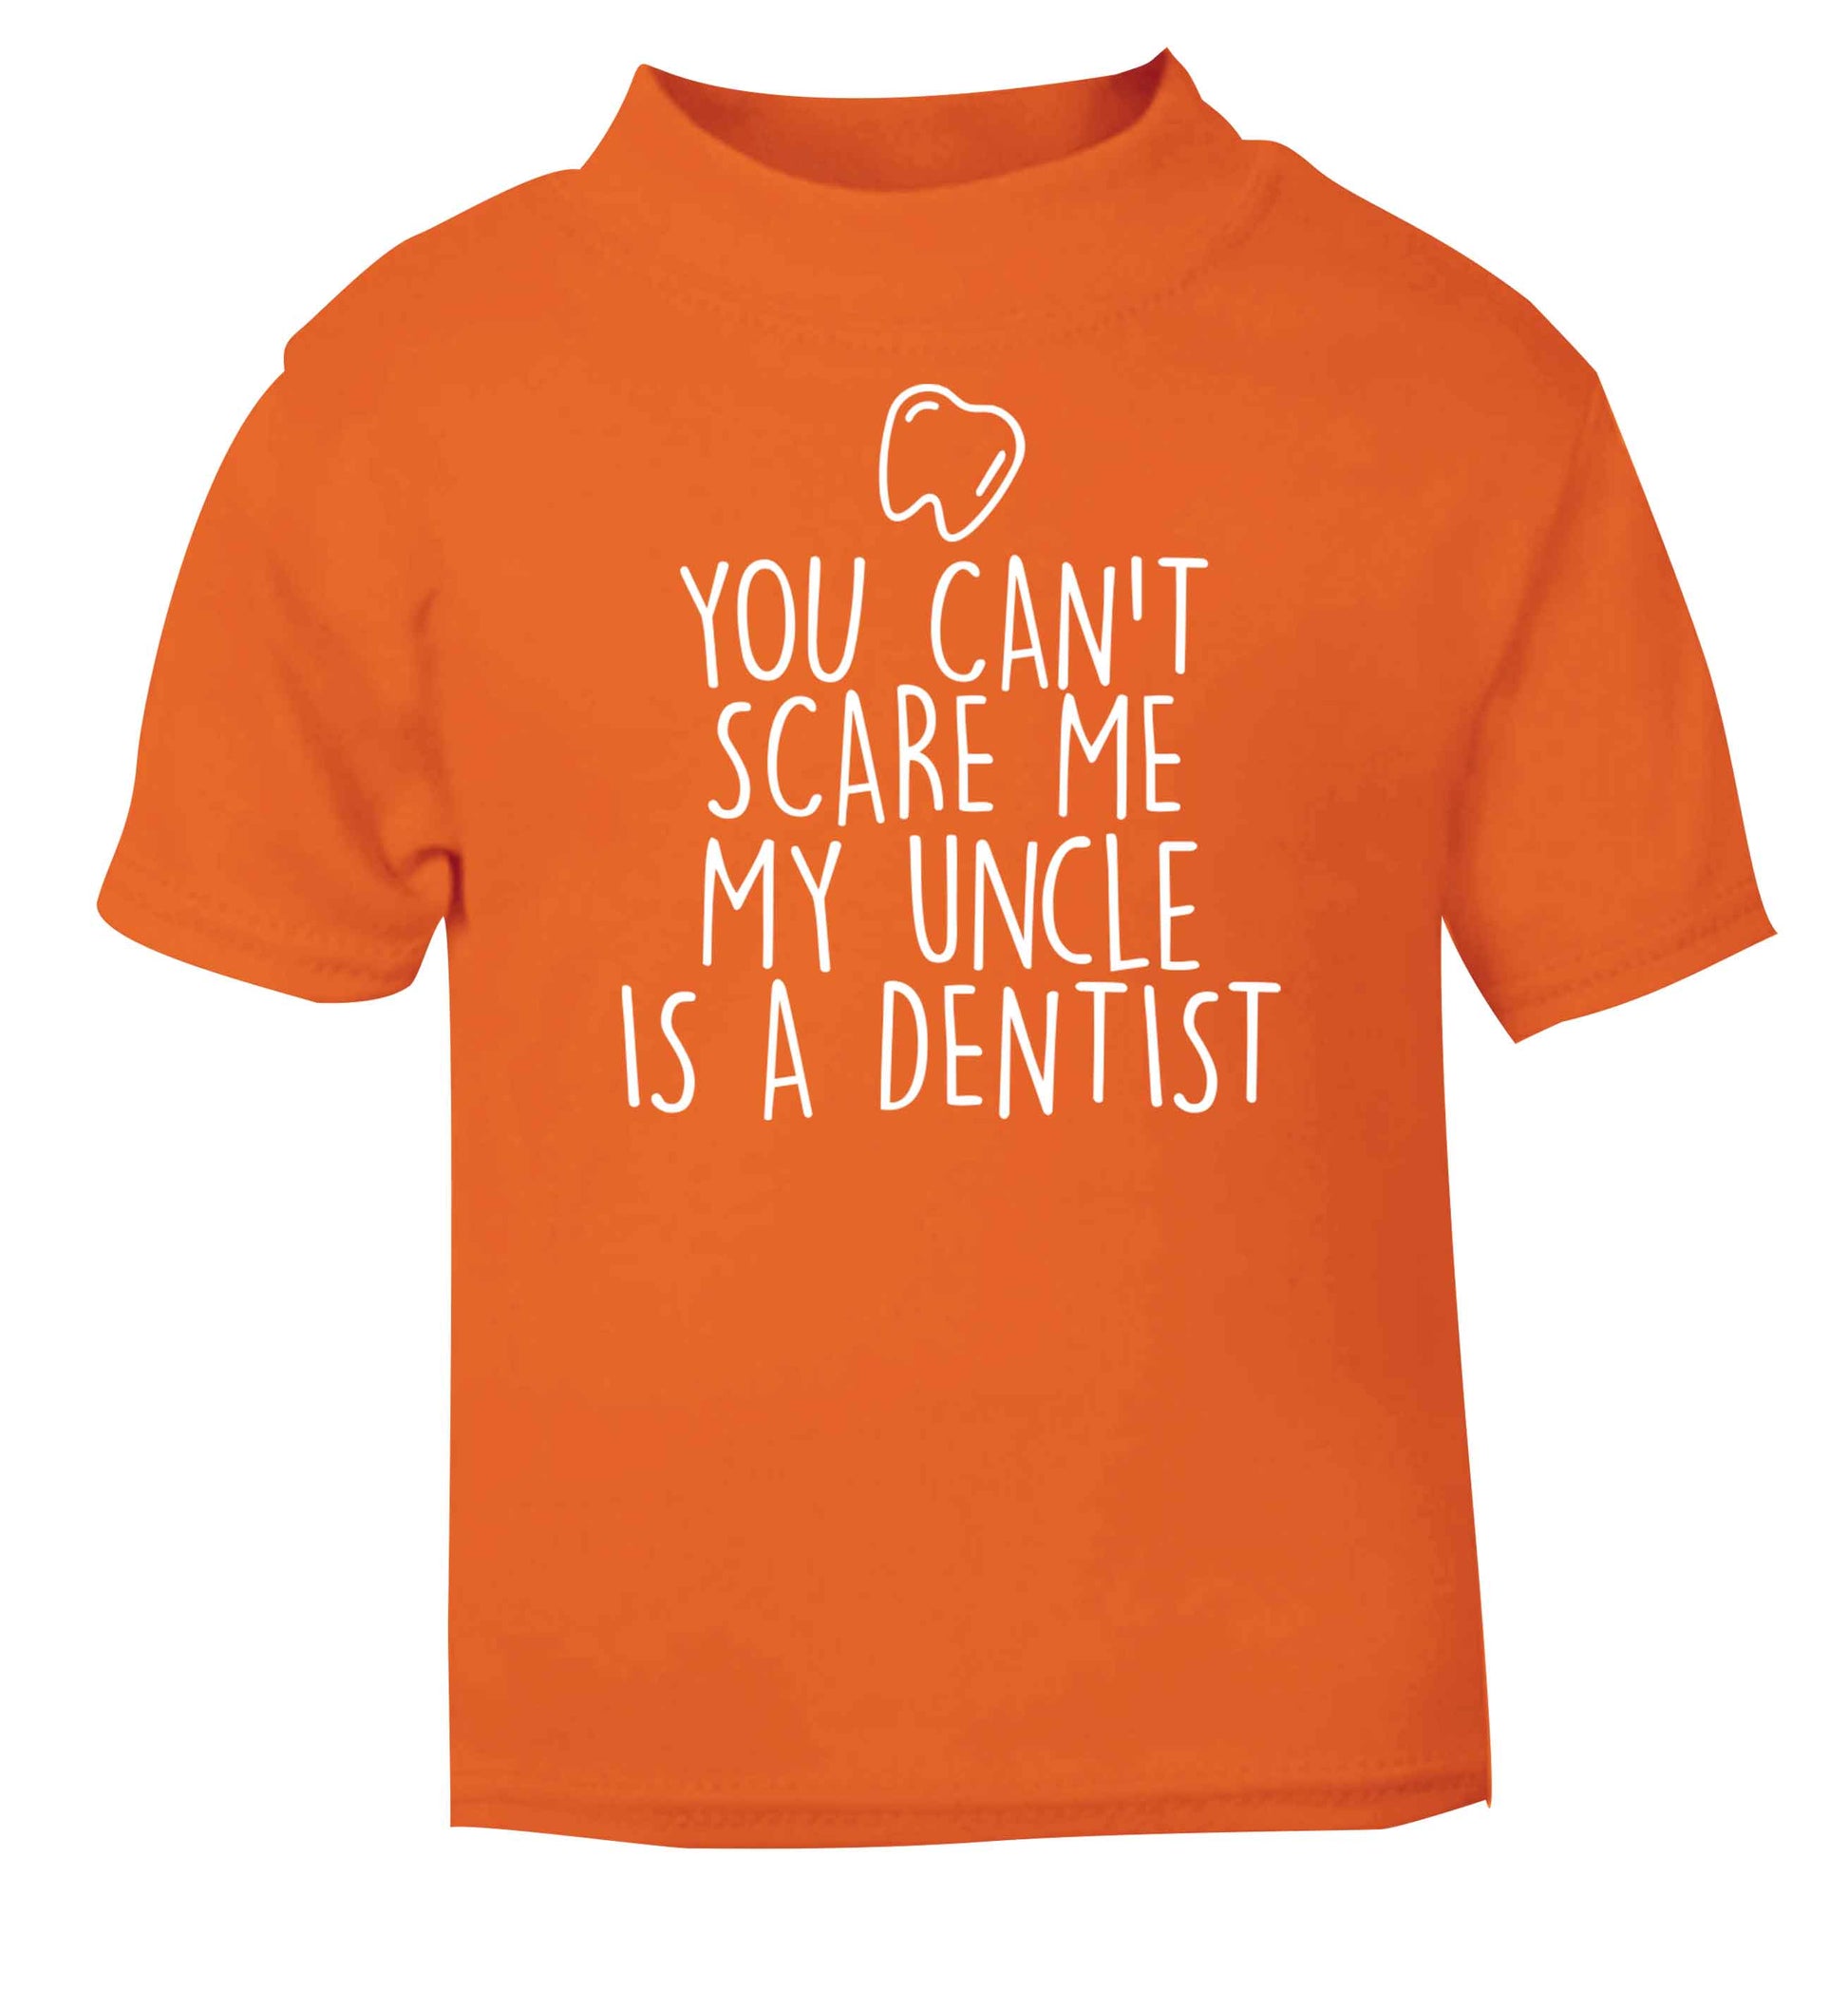 You can't scare me my uncle is a dentist orange baby toddler Tshirt 2 Years